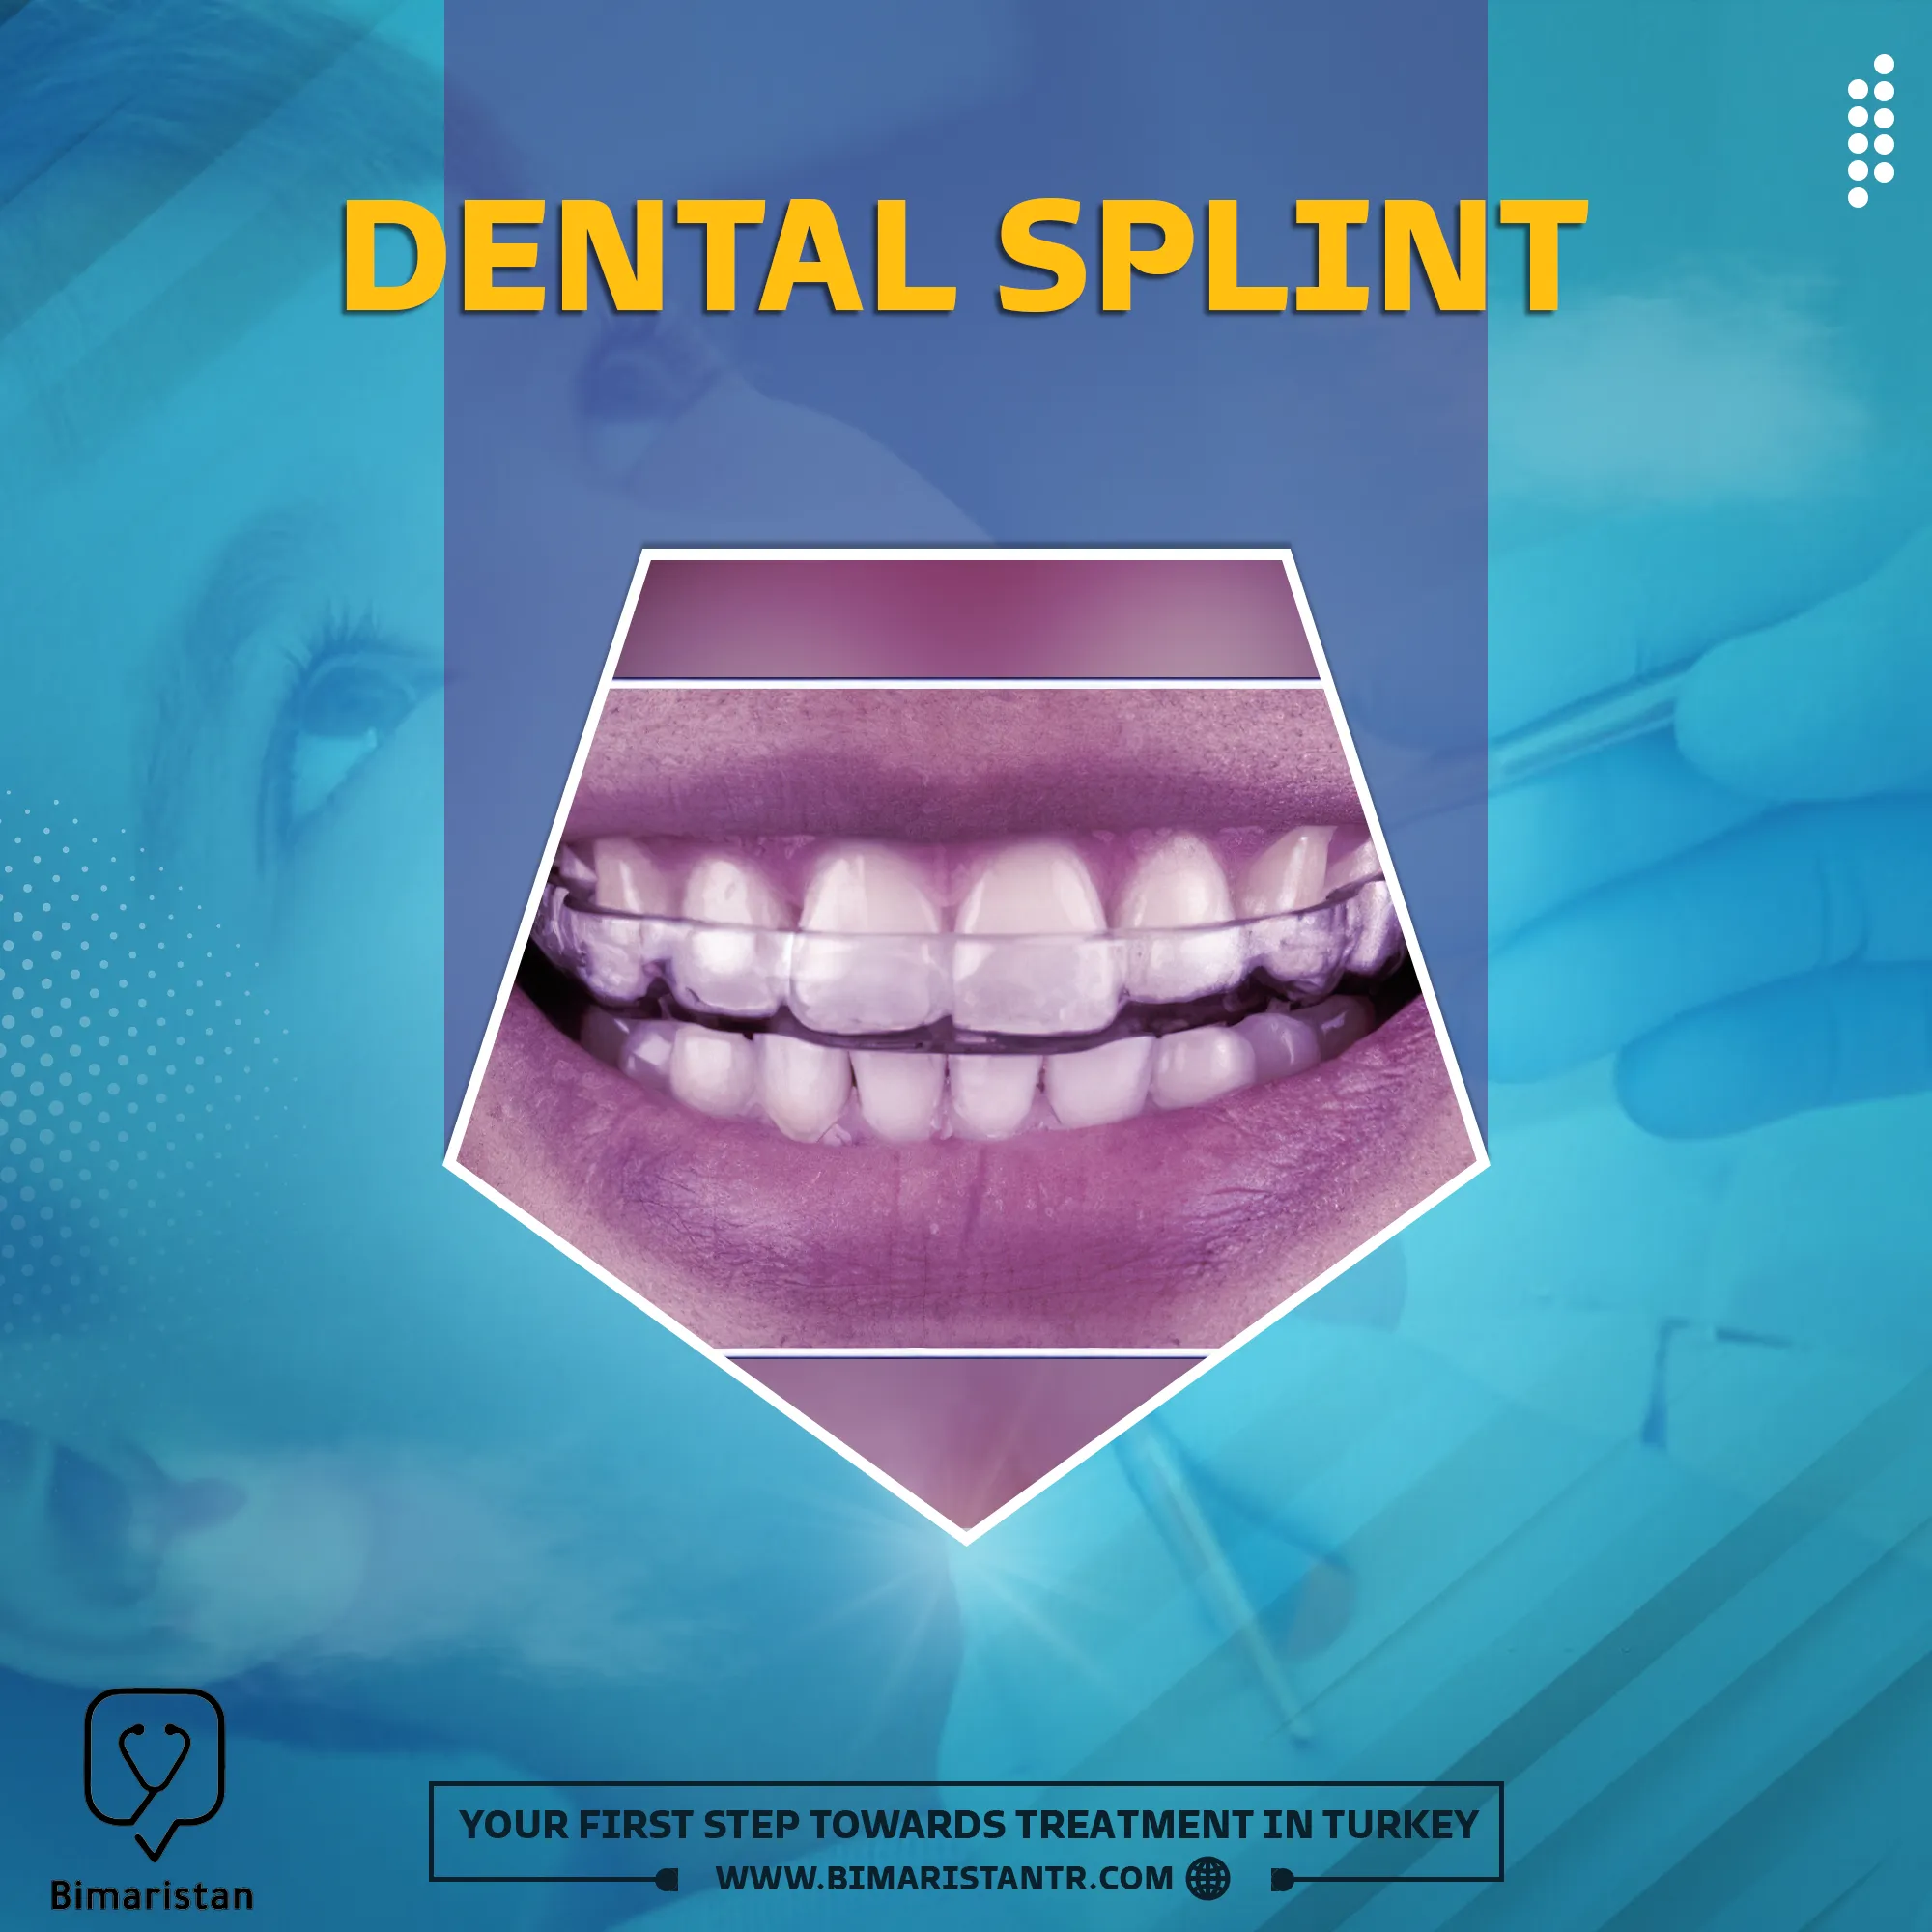 Types and uses of dental splints